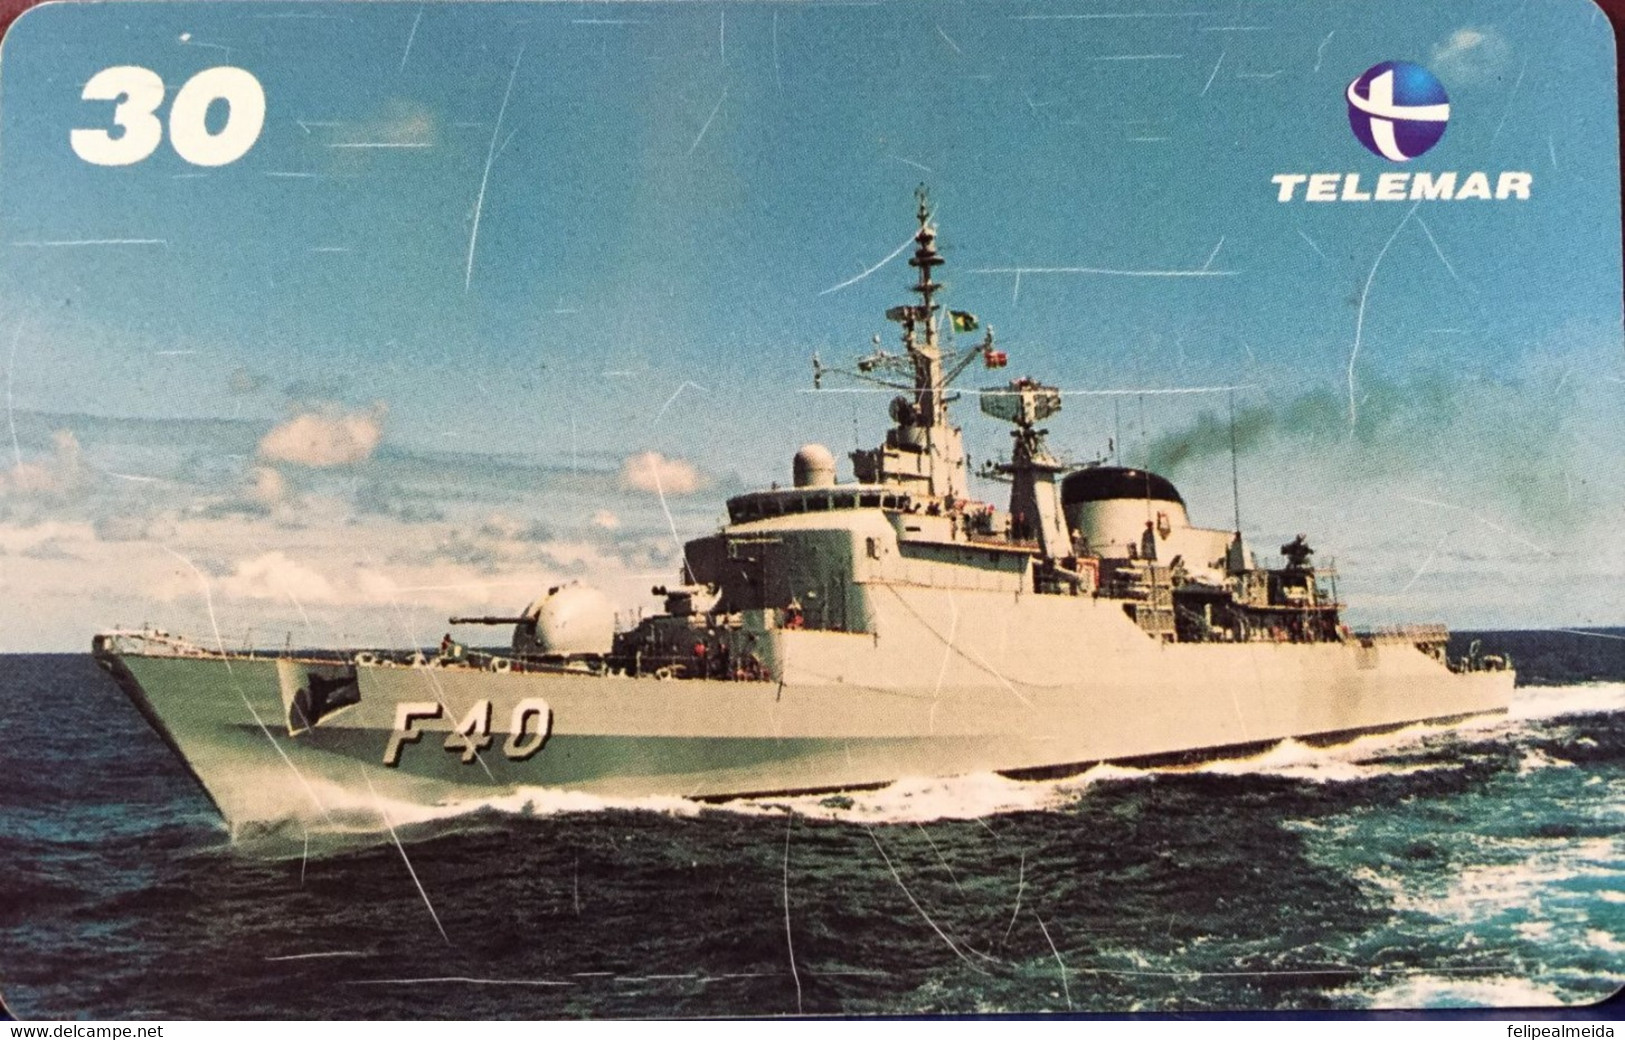 Phone Card Manufactured By Telemar In 2000 - Brazilian Navy - Commemoration Of The Fleet's 178th Anniversary - Photo Fra - Armee